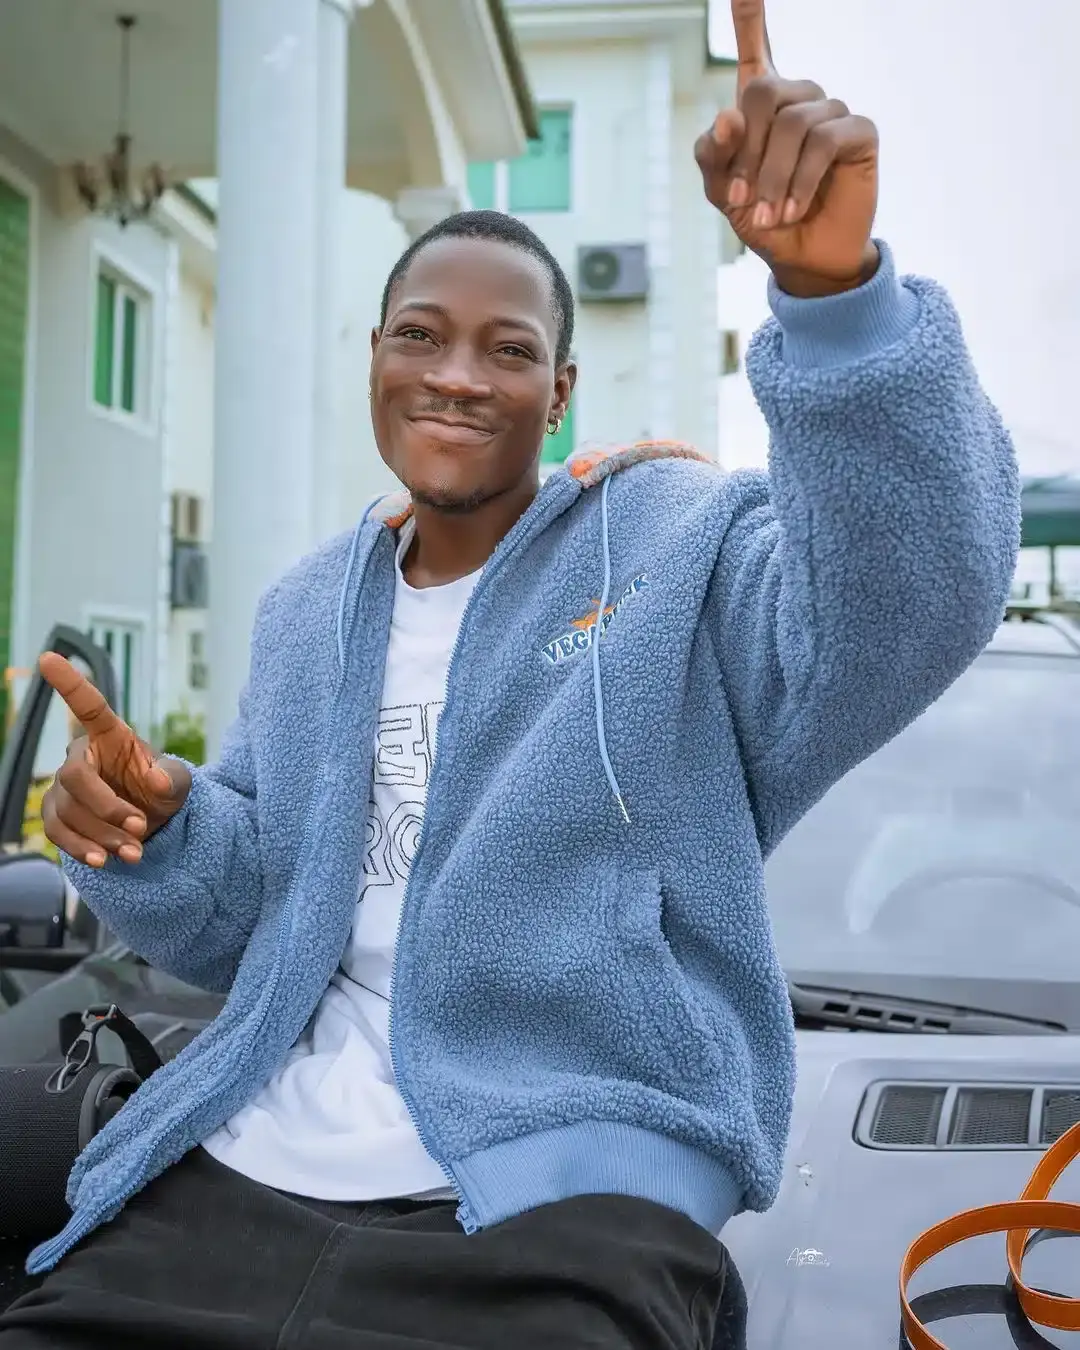 “Zlatan wan use my glory” — DJ Chicken cries out for help from his fans